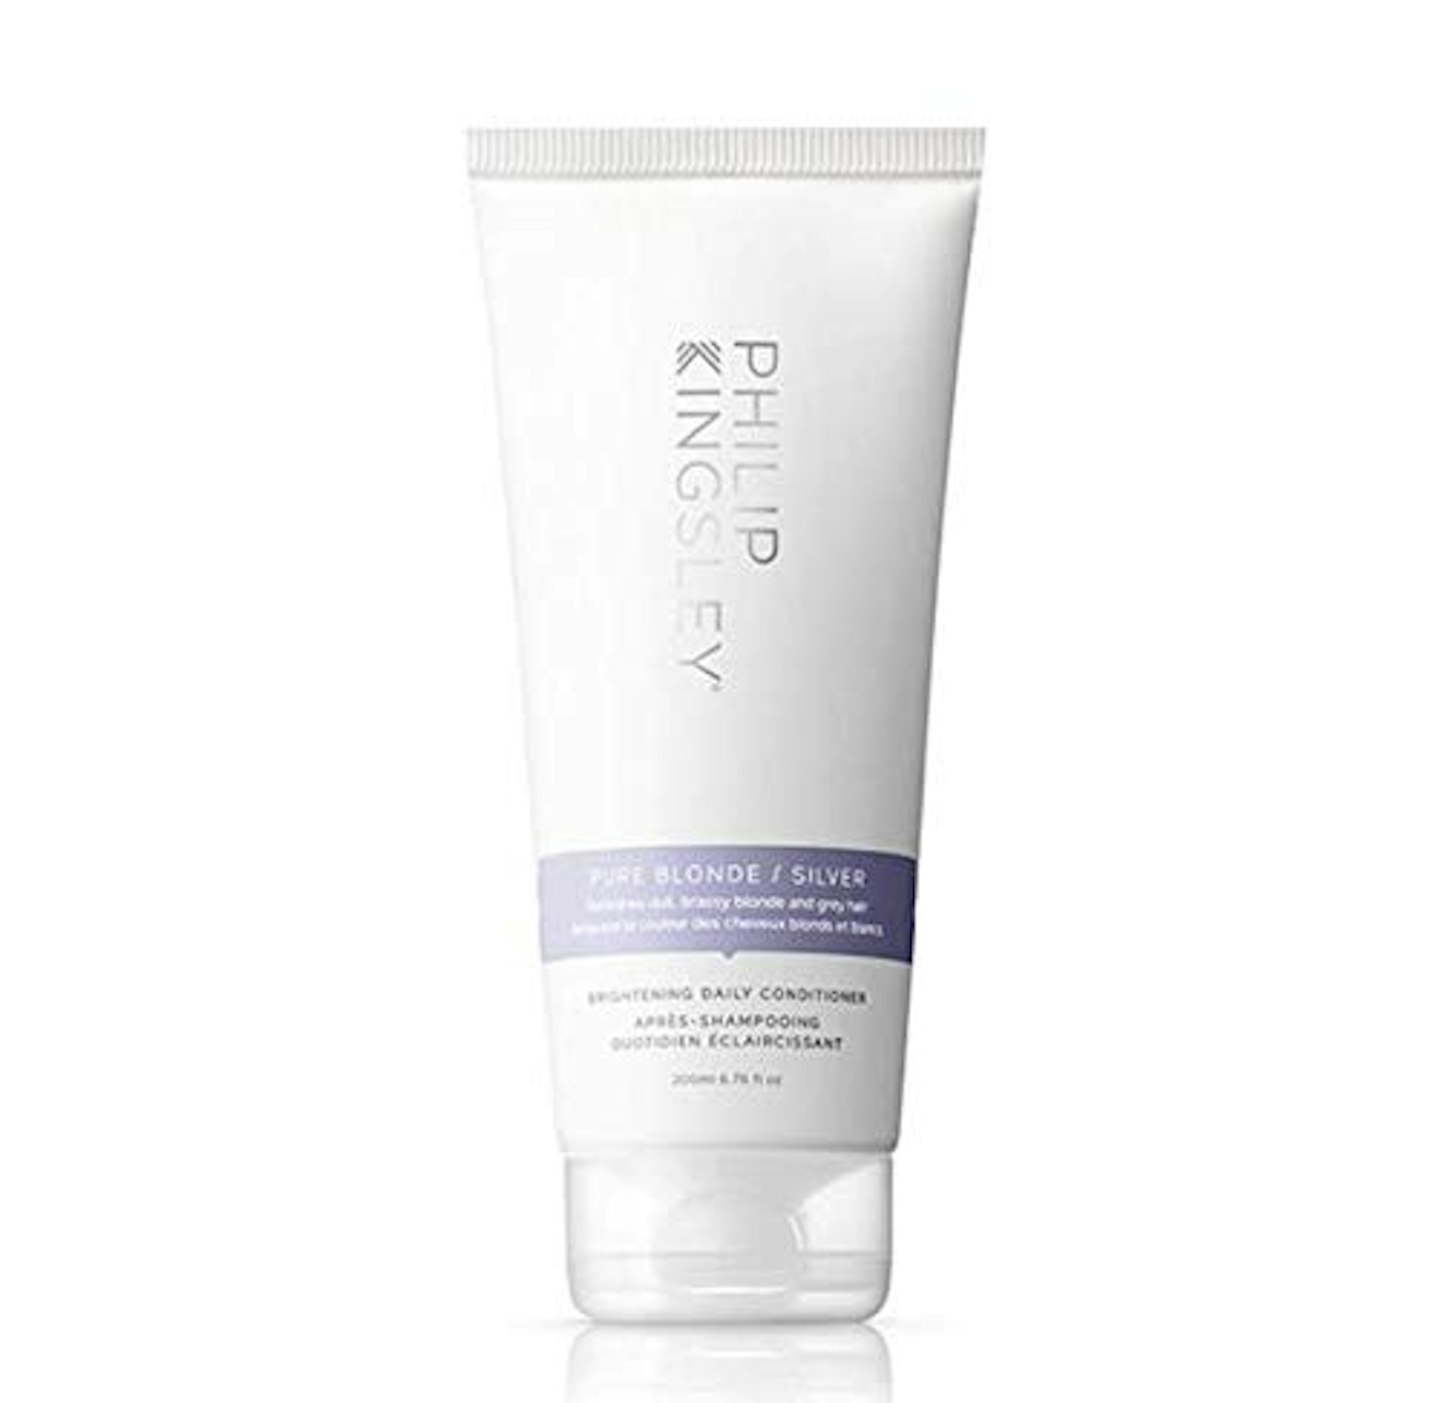 Pure Blonde Silver Brightening Daily Conditioner, £19.50